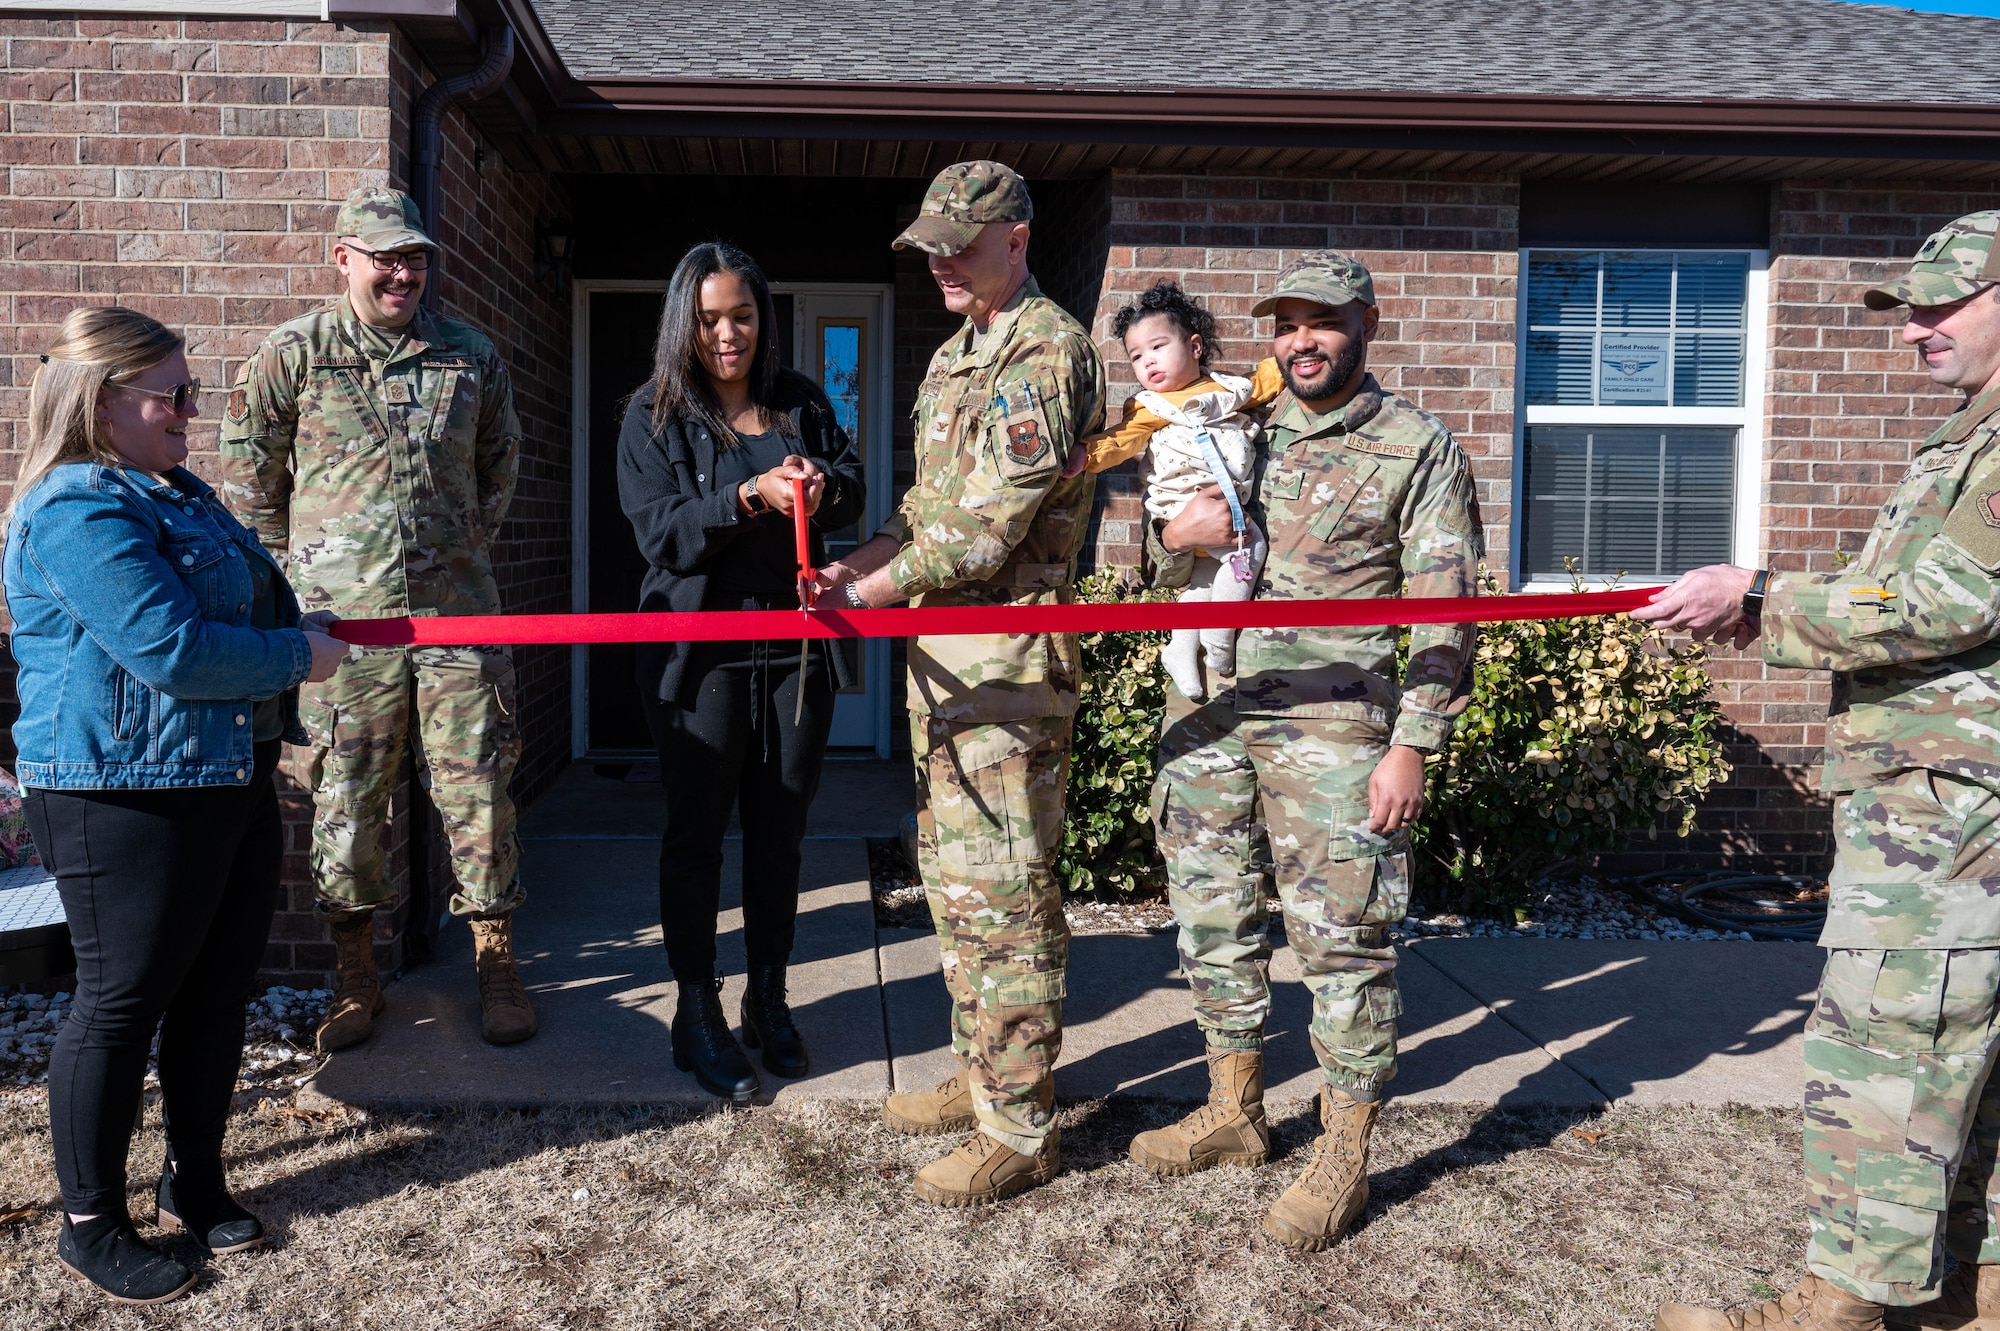 U.S. Air Force Col. Jeff Marshall, 97th Air Mobility Wing commander, and Roisveli Matos, Family Child Care (FCC) provider, cut a ribbon during a ceremony at Altus Air Force Base, Oklahoma, Jan. 29, 2024. The ceremony honored Matos’ accomplishment, officially opening her FCC home to provide care for families on base. (U.S. Air Force photo by Airman 1st Class Heidi Bucins)